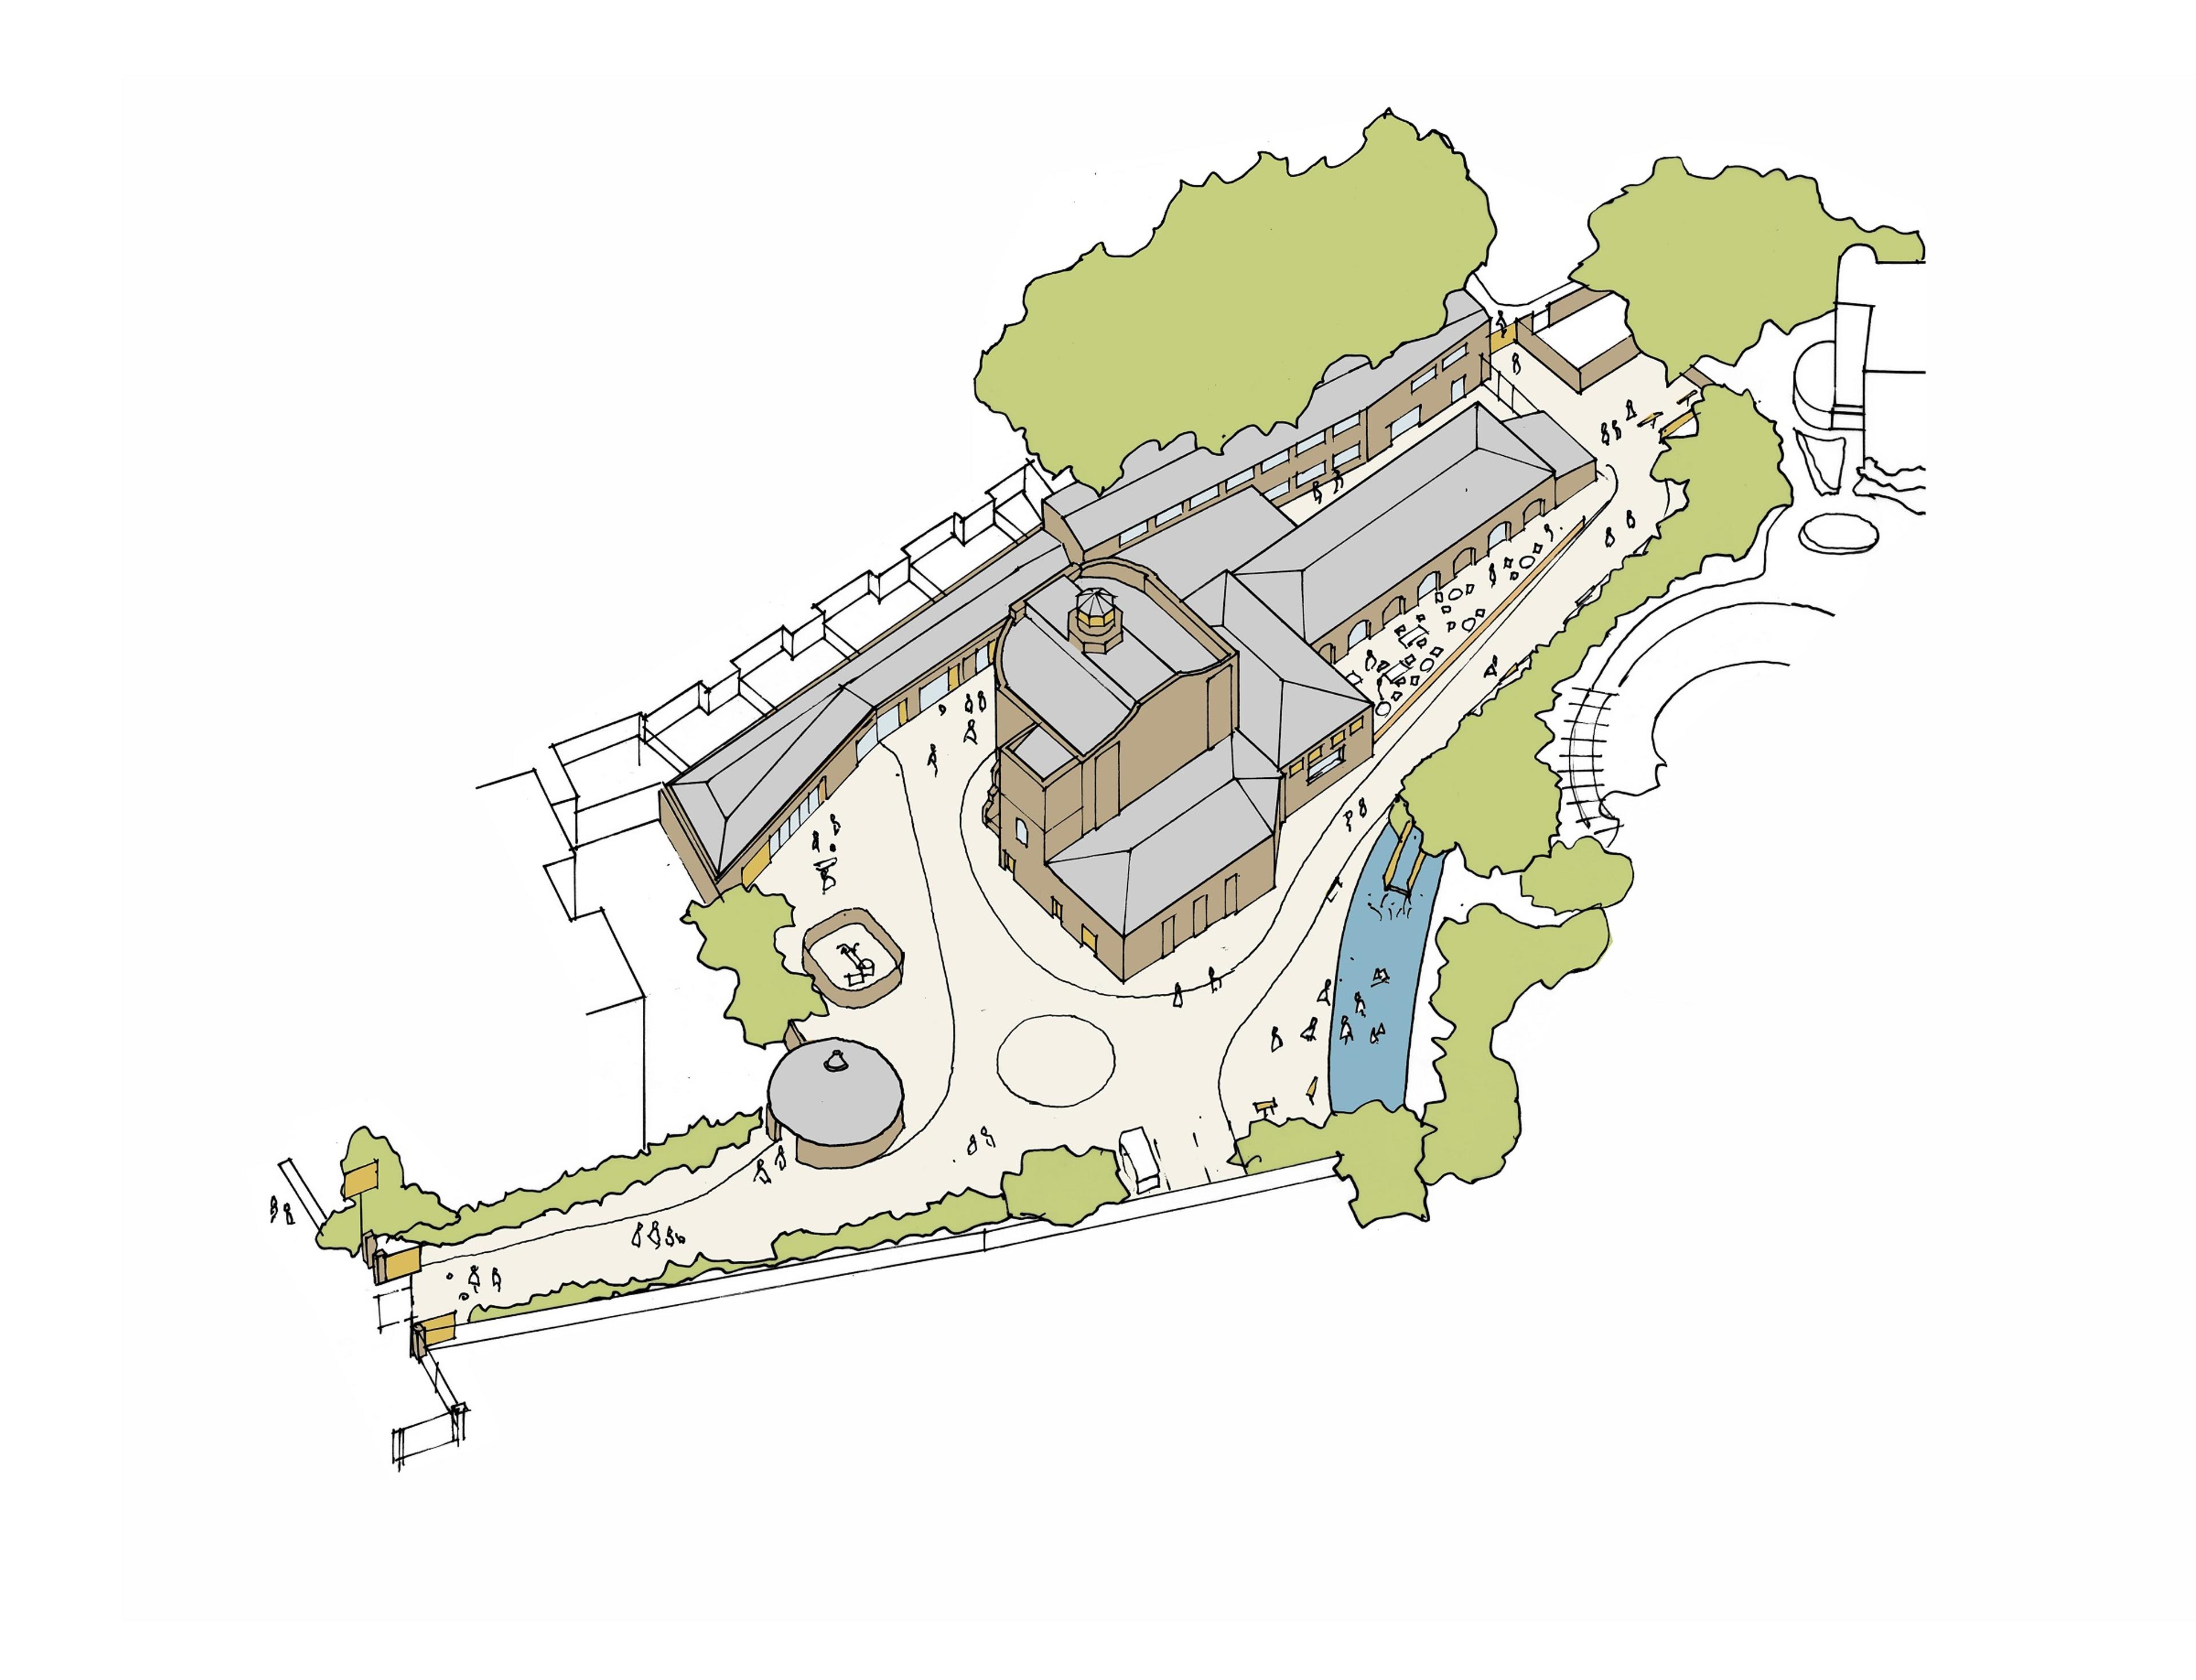 Drawing of heritage site seen from above, surrounded by pond and greenery